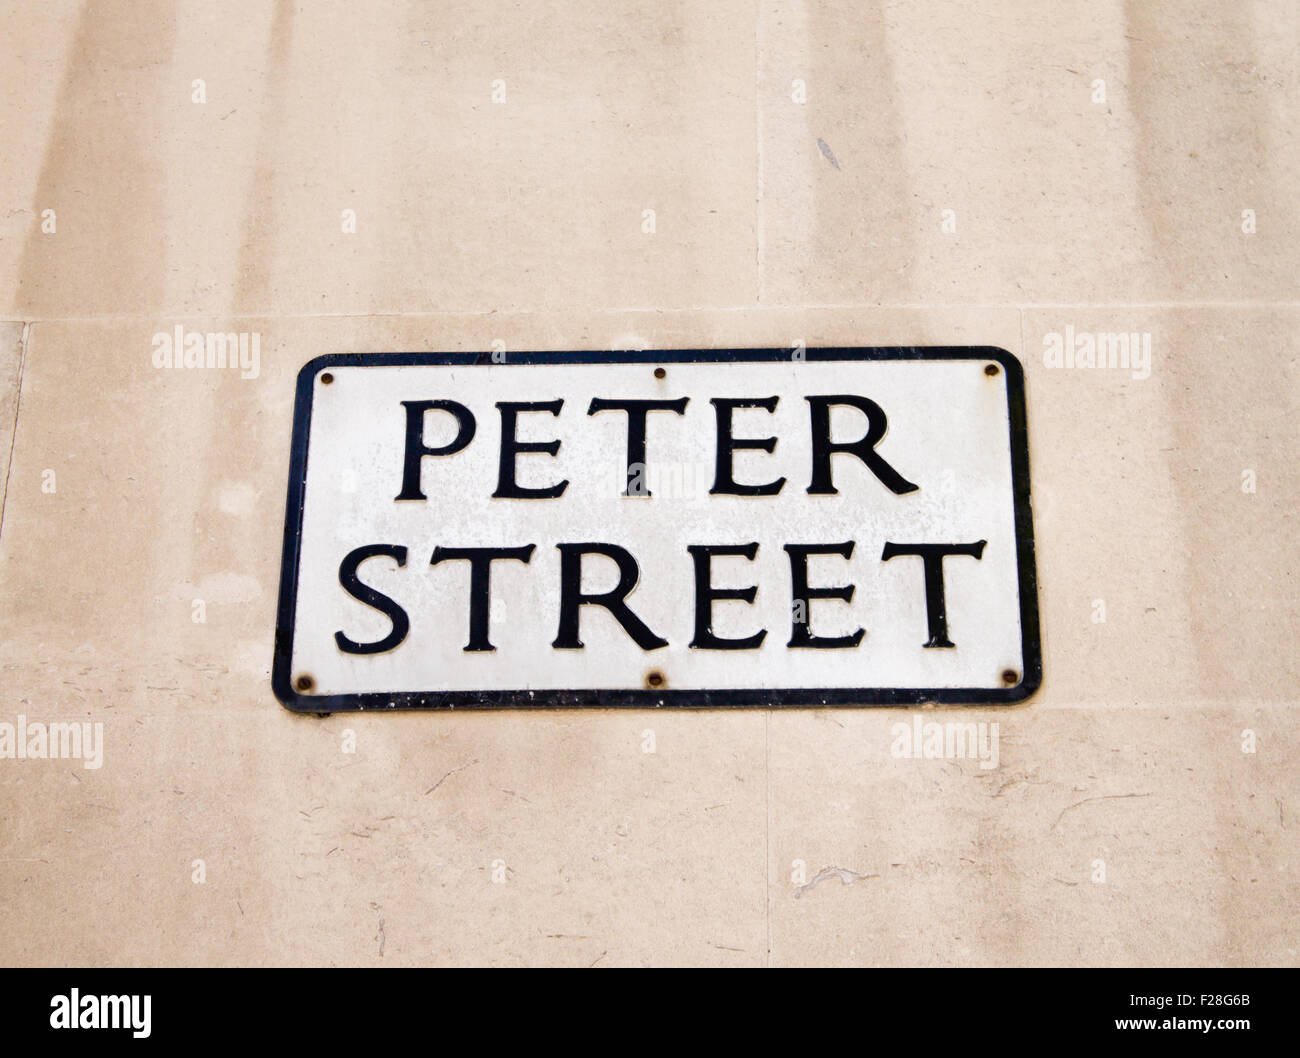 Peter Street street sign in Manchester, Royaume-Uni. Banque D'Images